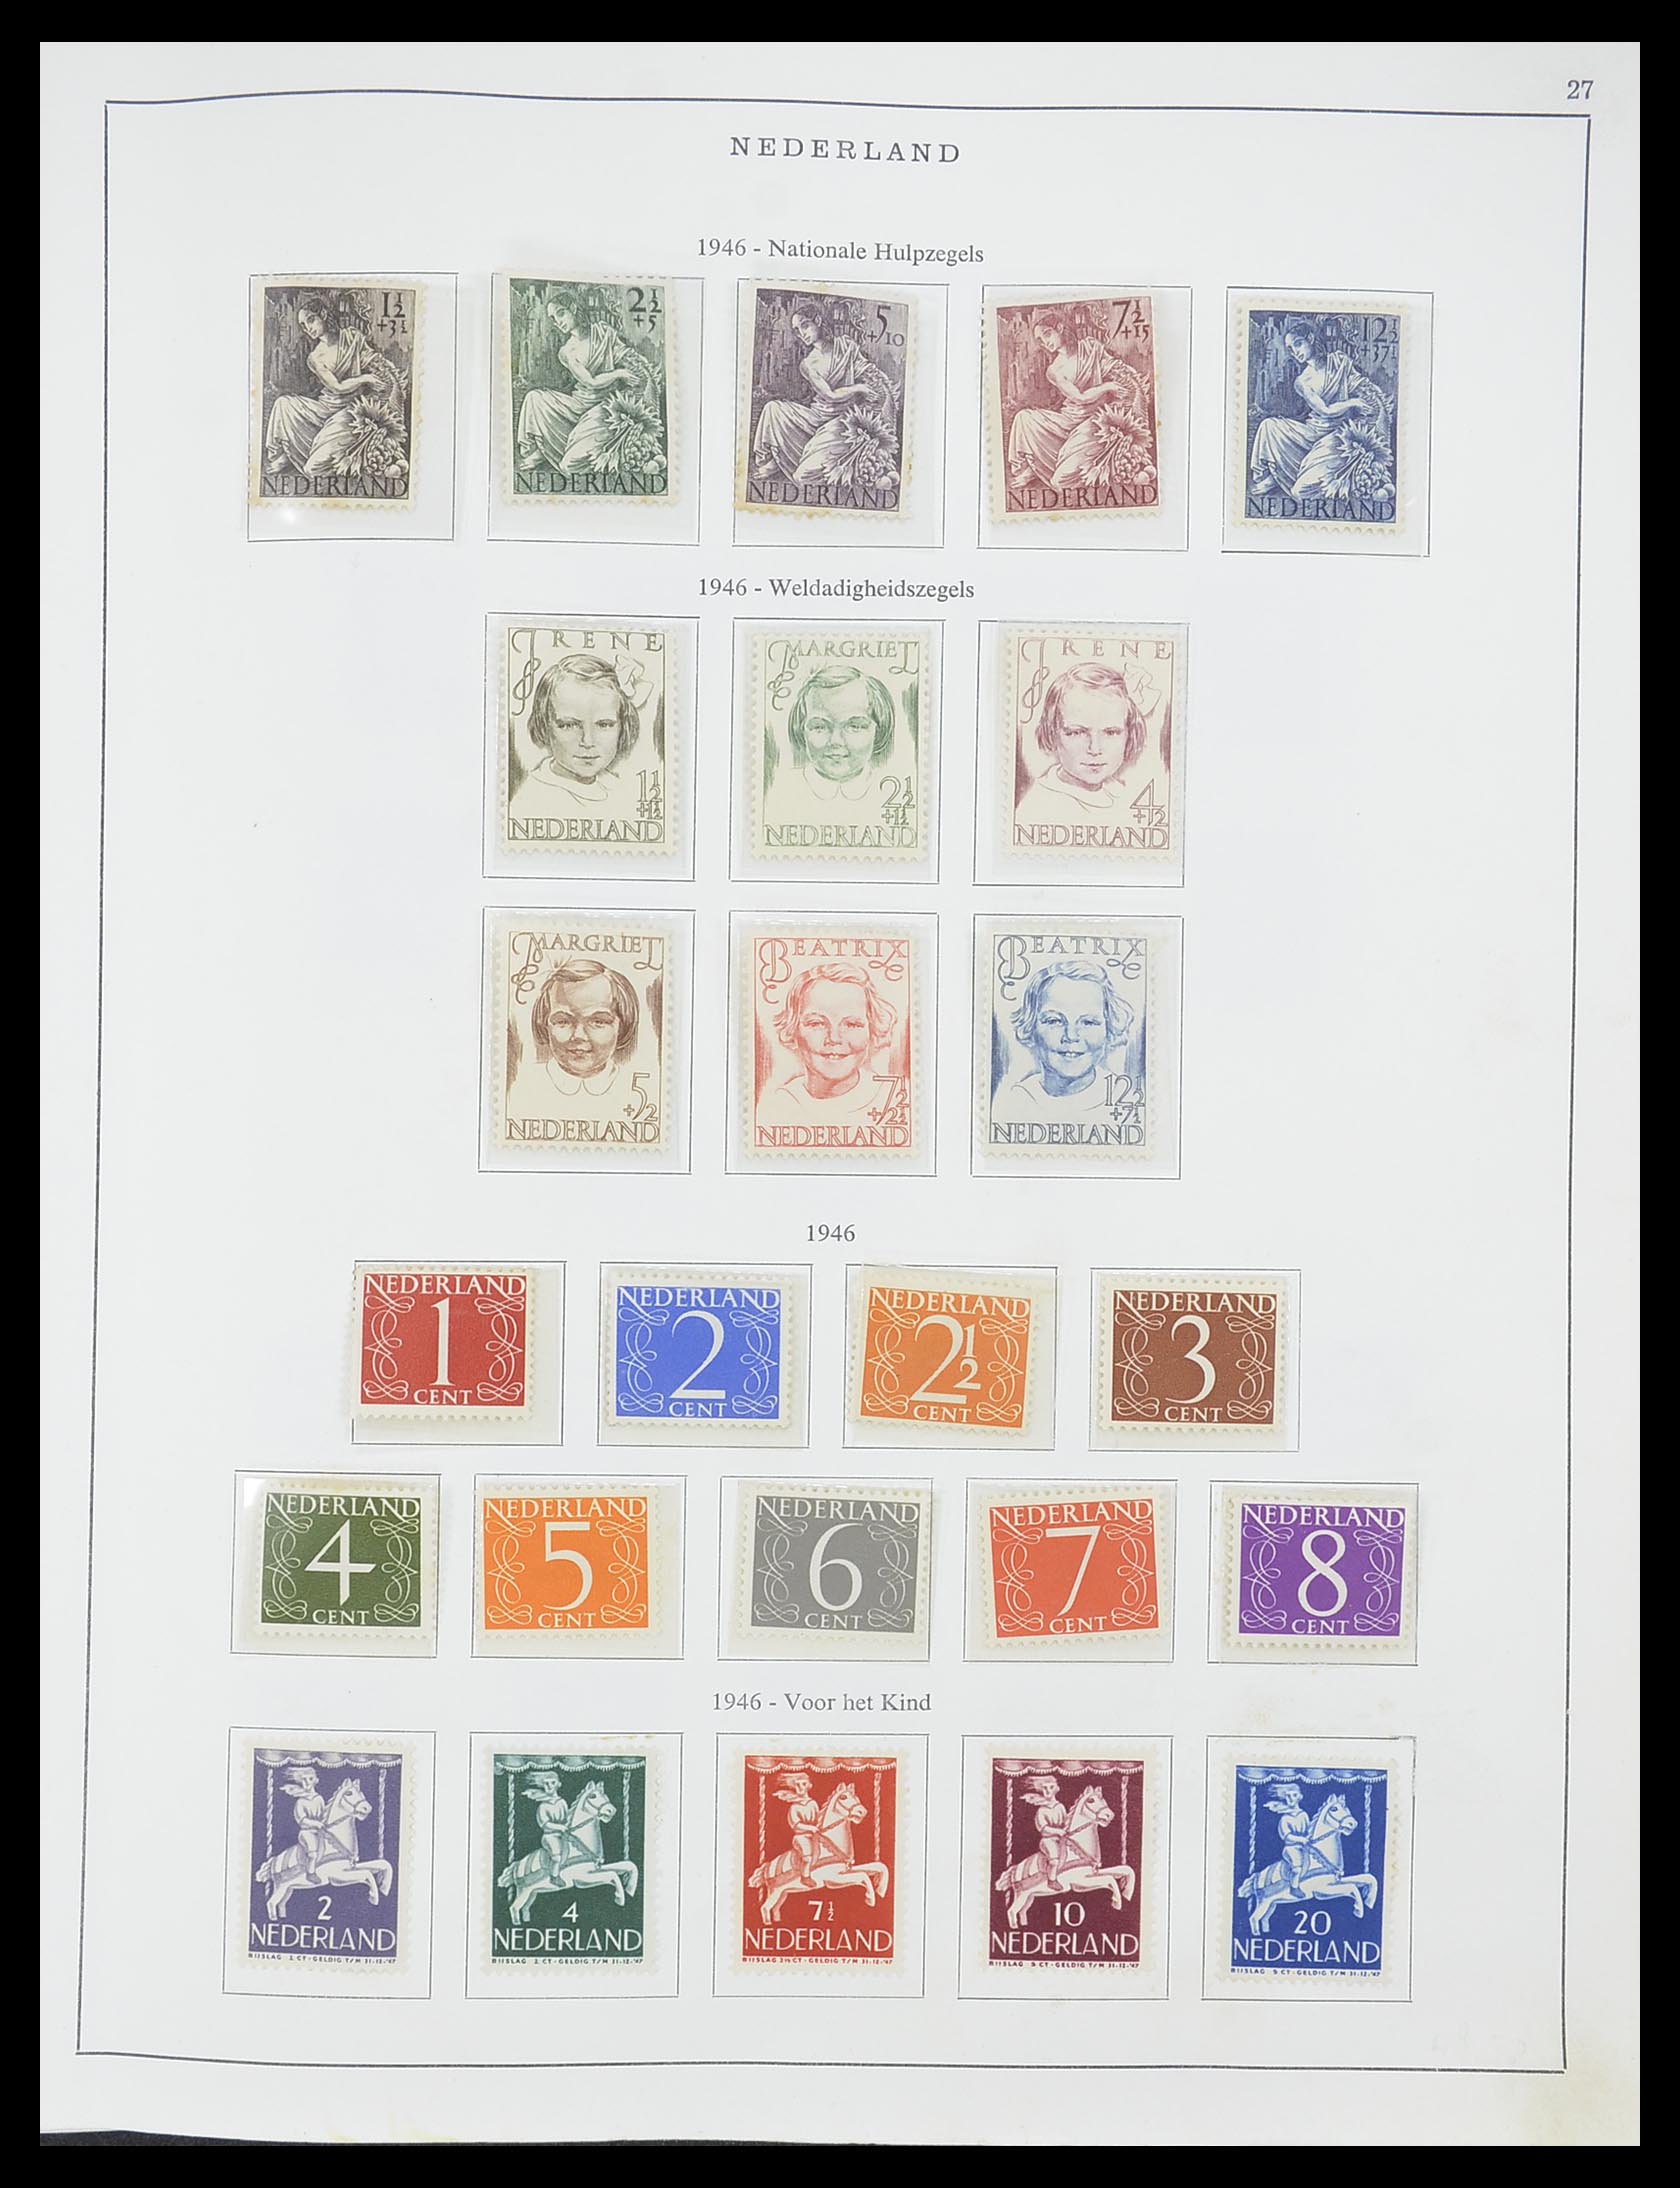 33604 001 - Stamp collection 33604 Netherlands 1946-1987.